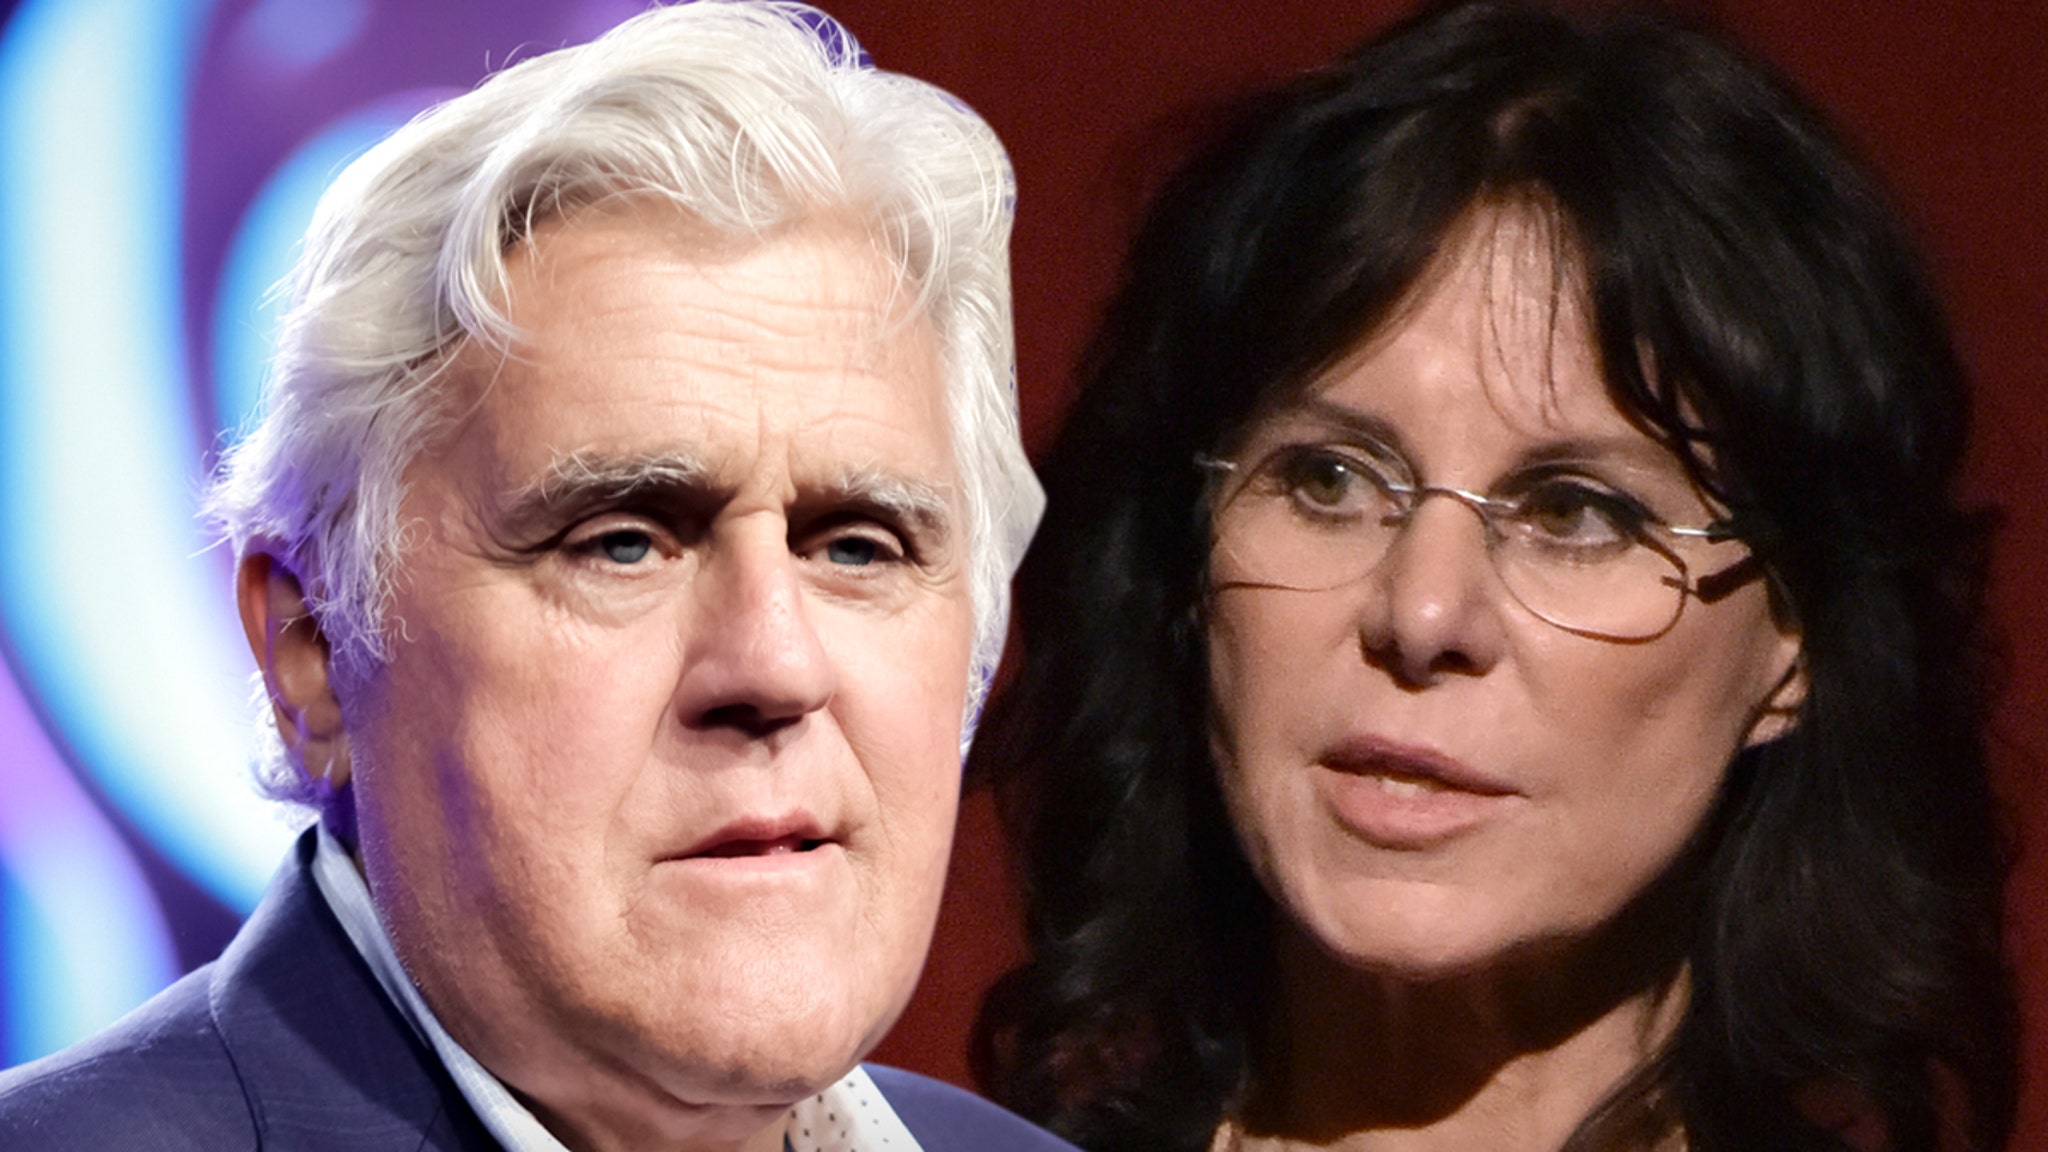 Jay Leno seeks guardianship over his wife, Mavis, who suffers from Alzheimer's disease